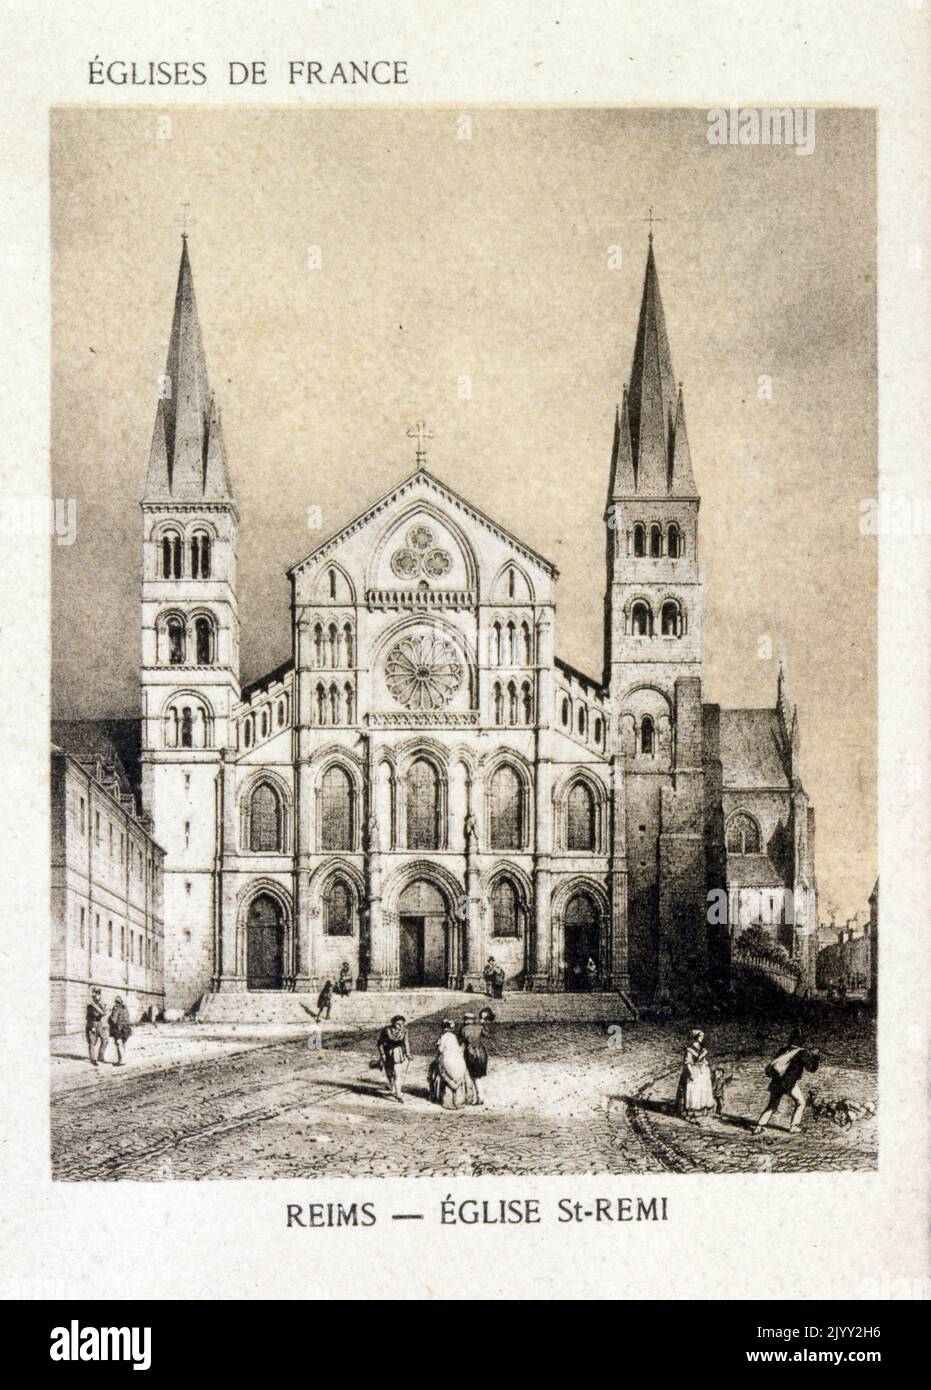 Drawing of the Abbey of Saint-Remi, in Reims, France, founded in the sixth century. Since 1099 it has conserved the relics of Saint Remi (died 553), the Bishop of Reims who converted Clovis, King of the Franks, to Christianity at Christmas in AD 496, after he defeated the Alamanni in the Battle of Tolbiac. The present basilica was the abbey church; it was consecrated by Pope Leo IX in 1049. The eleventh-century nave and transepts, in the Romanesque style, are the oldest; the facade of the south transept is the most recent. Stock Photo